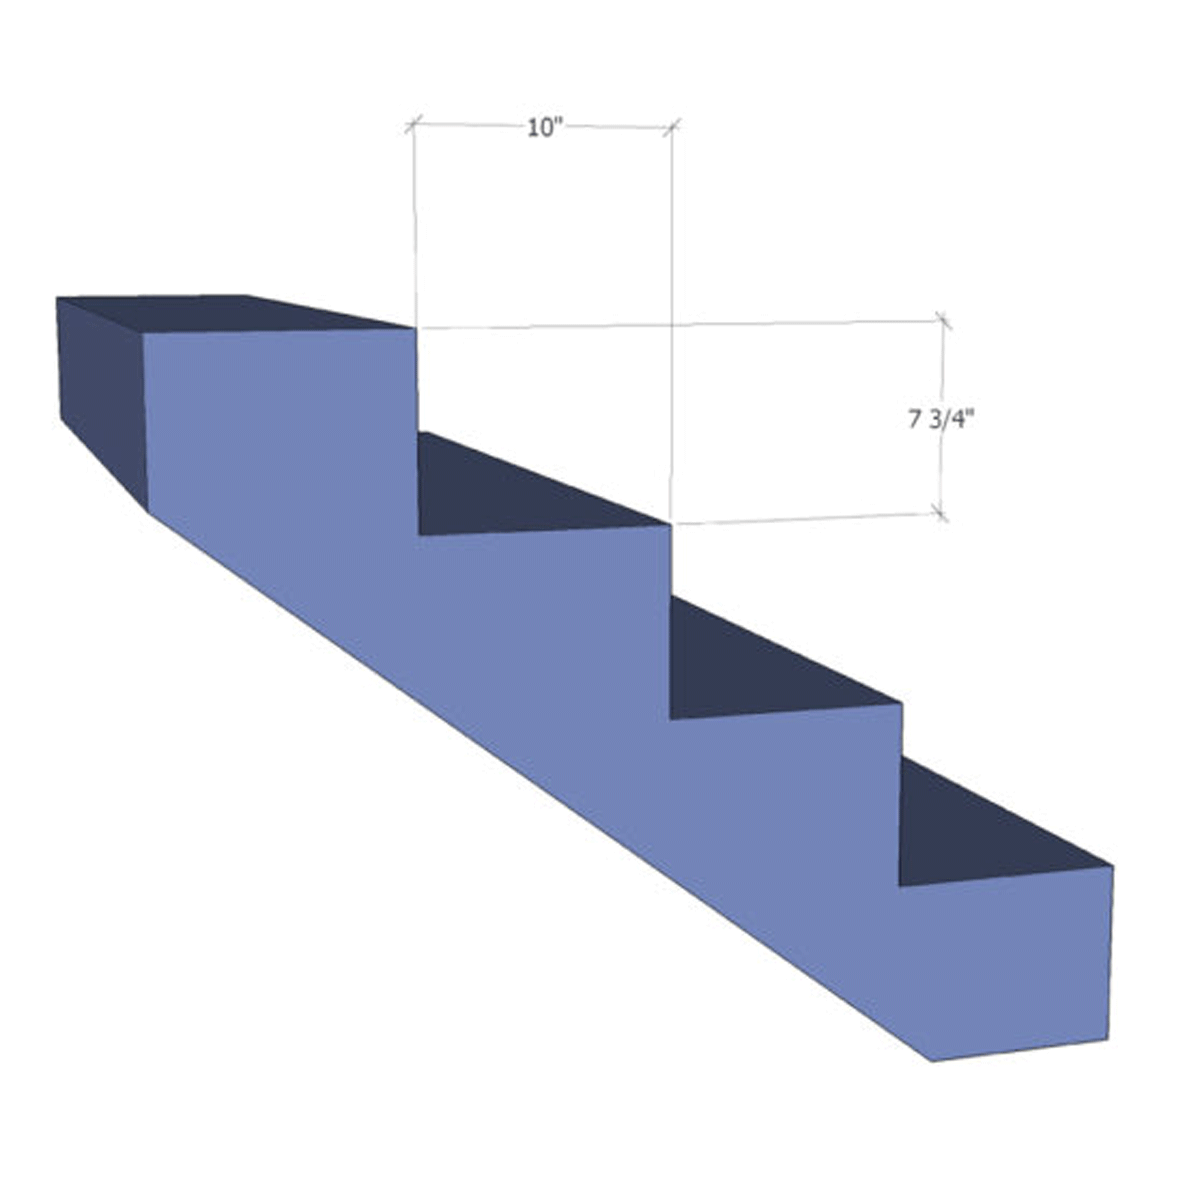 IRC code limit stair: rise r ≤ 7 3/4" run R ≥ 10" r+R = 17 3/4" (good) 2r+R = 25 1/2" (within range) → stair will be comfortable